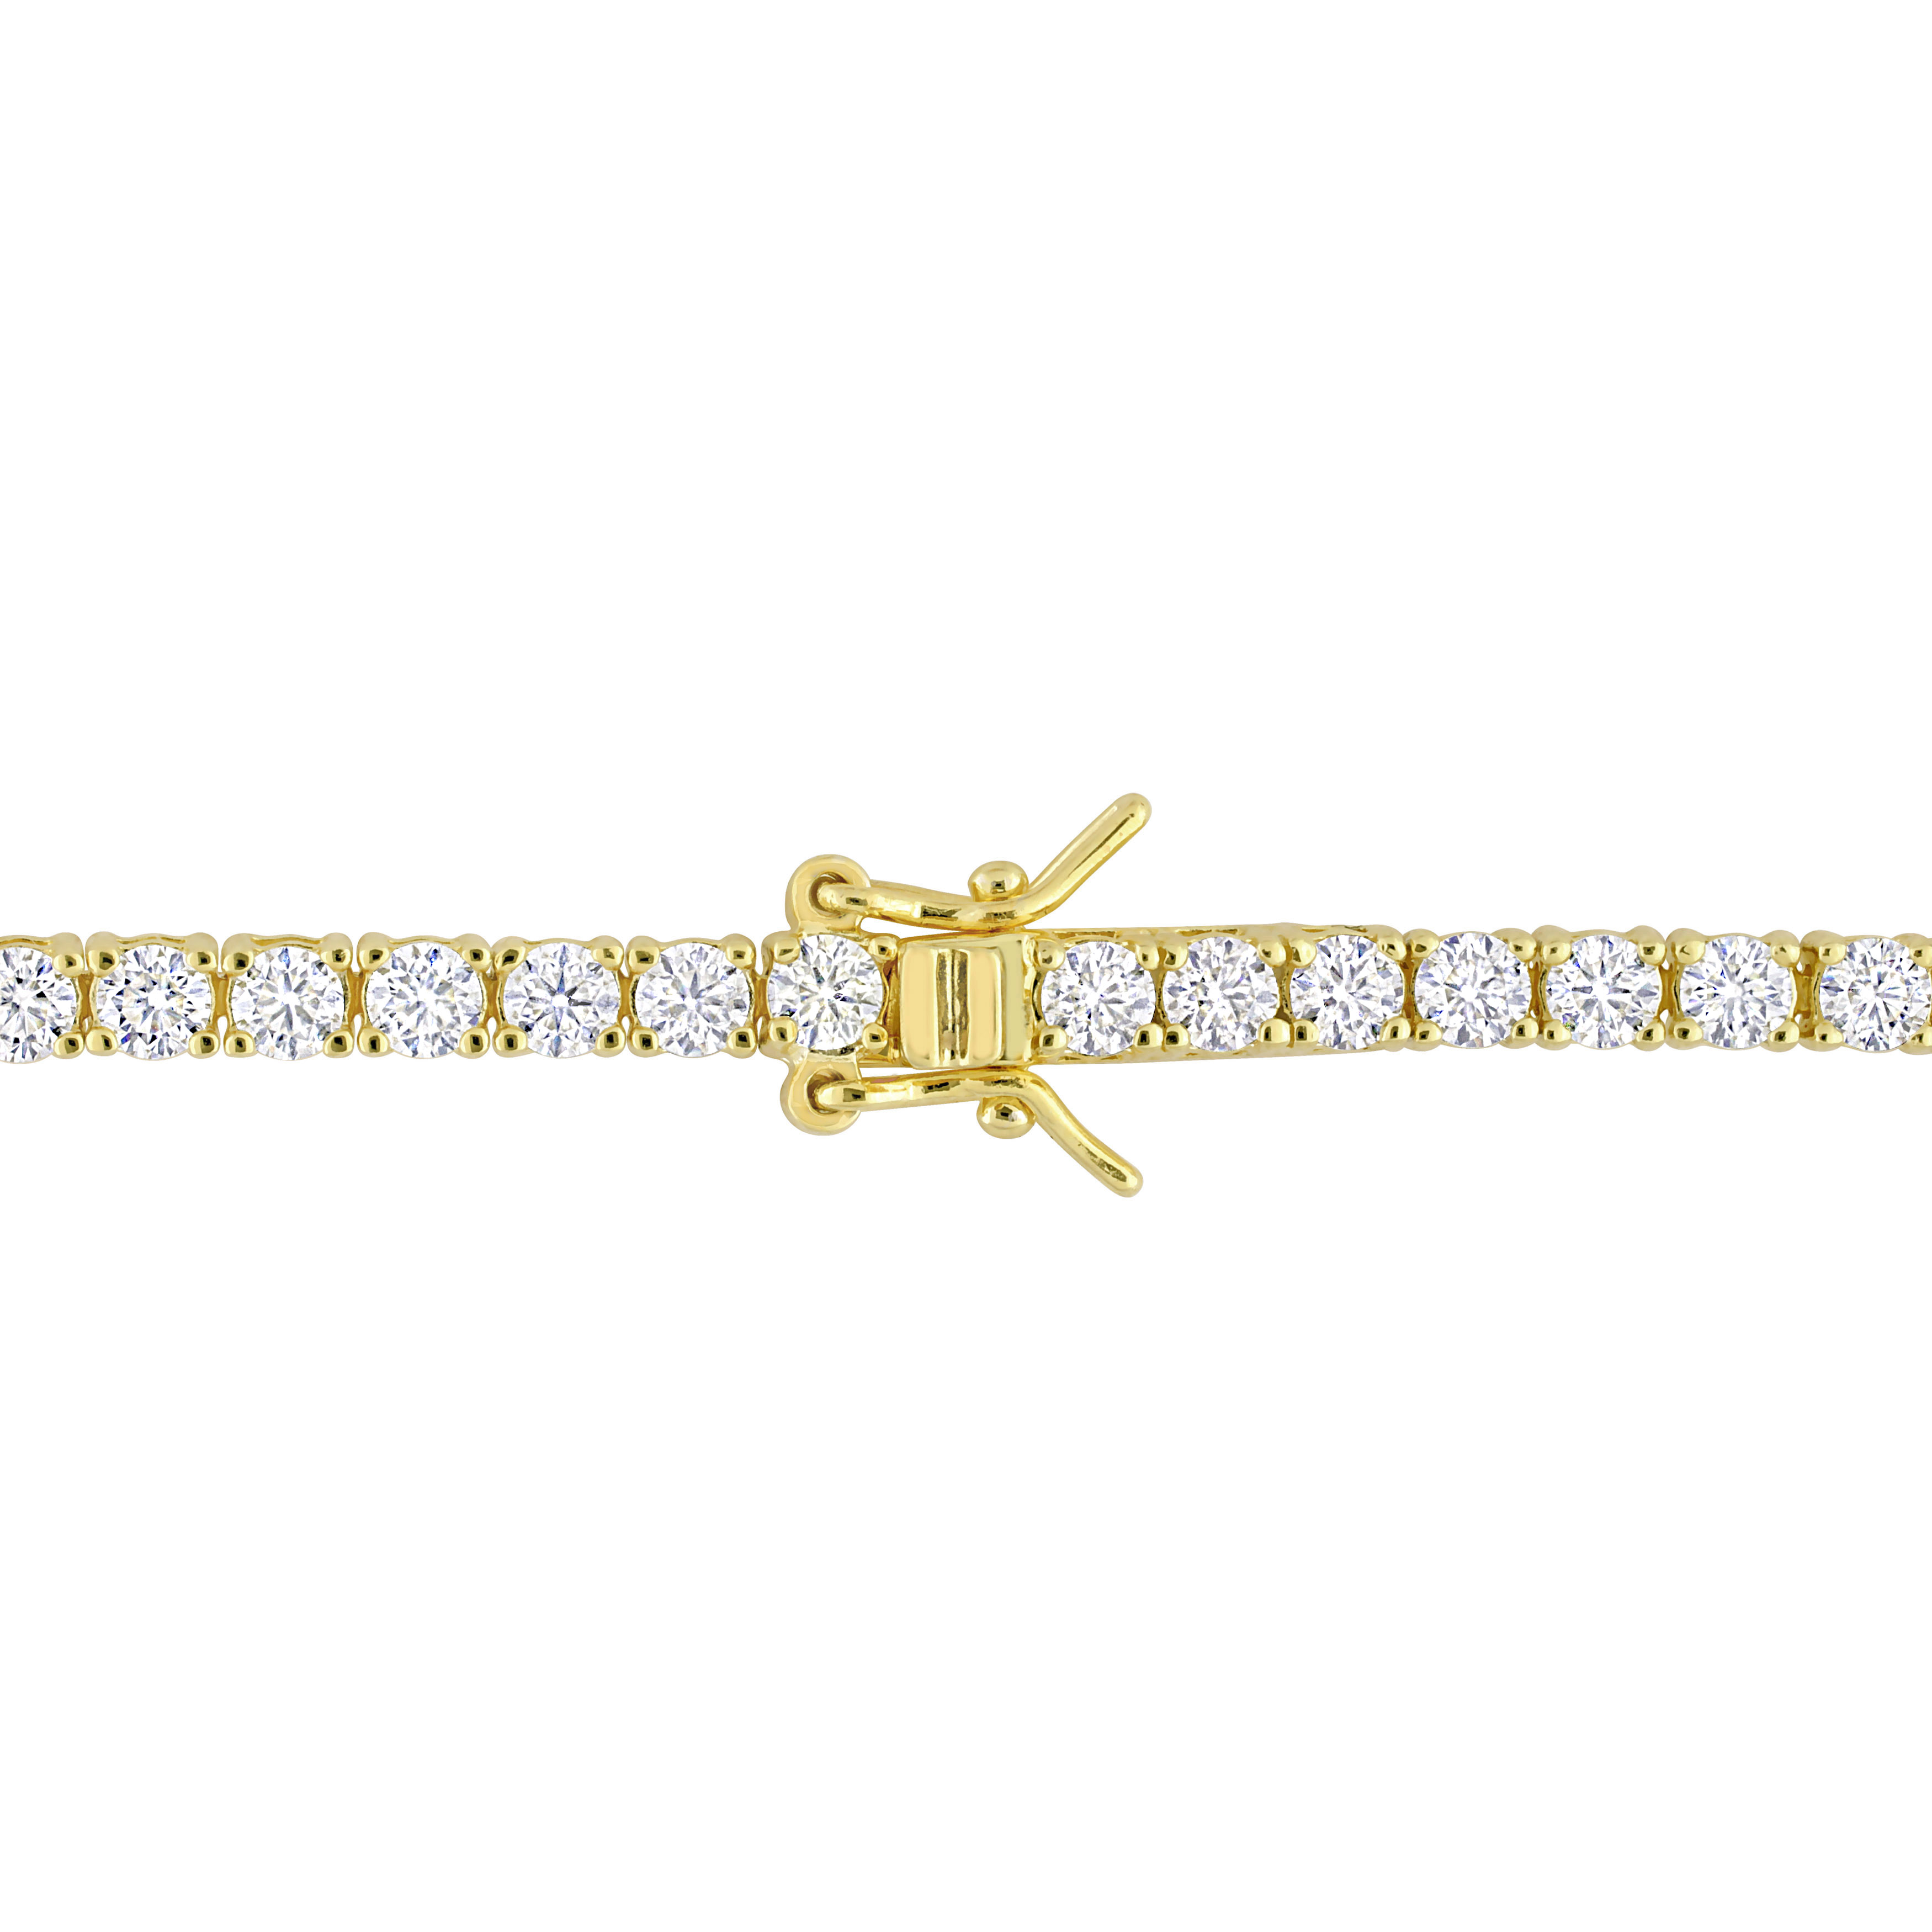 5 5/8 CT TGW Created Moissanite Tennis Bracelet in Yellow Plated Sterling Silver - 8 in.